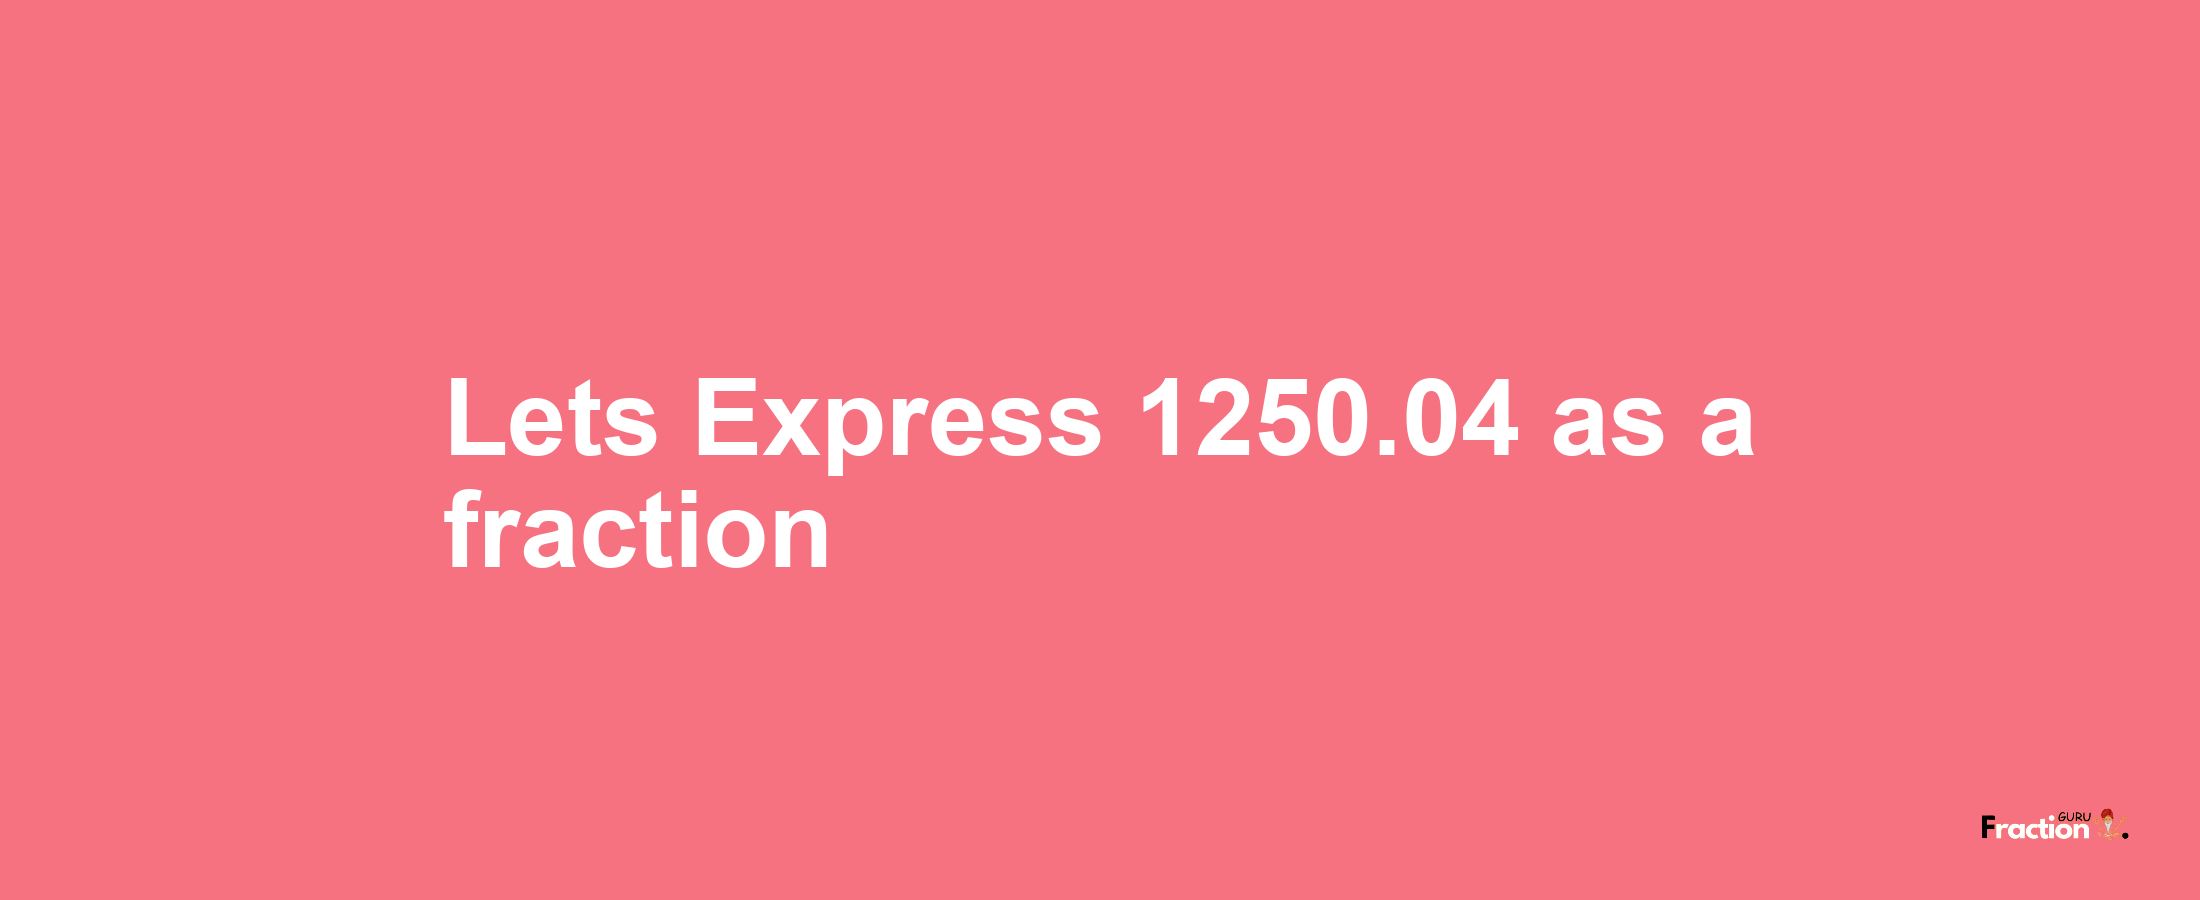 Lets Express 1250.04 as afraction